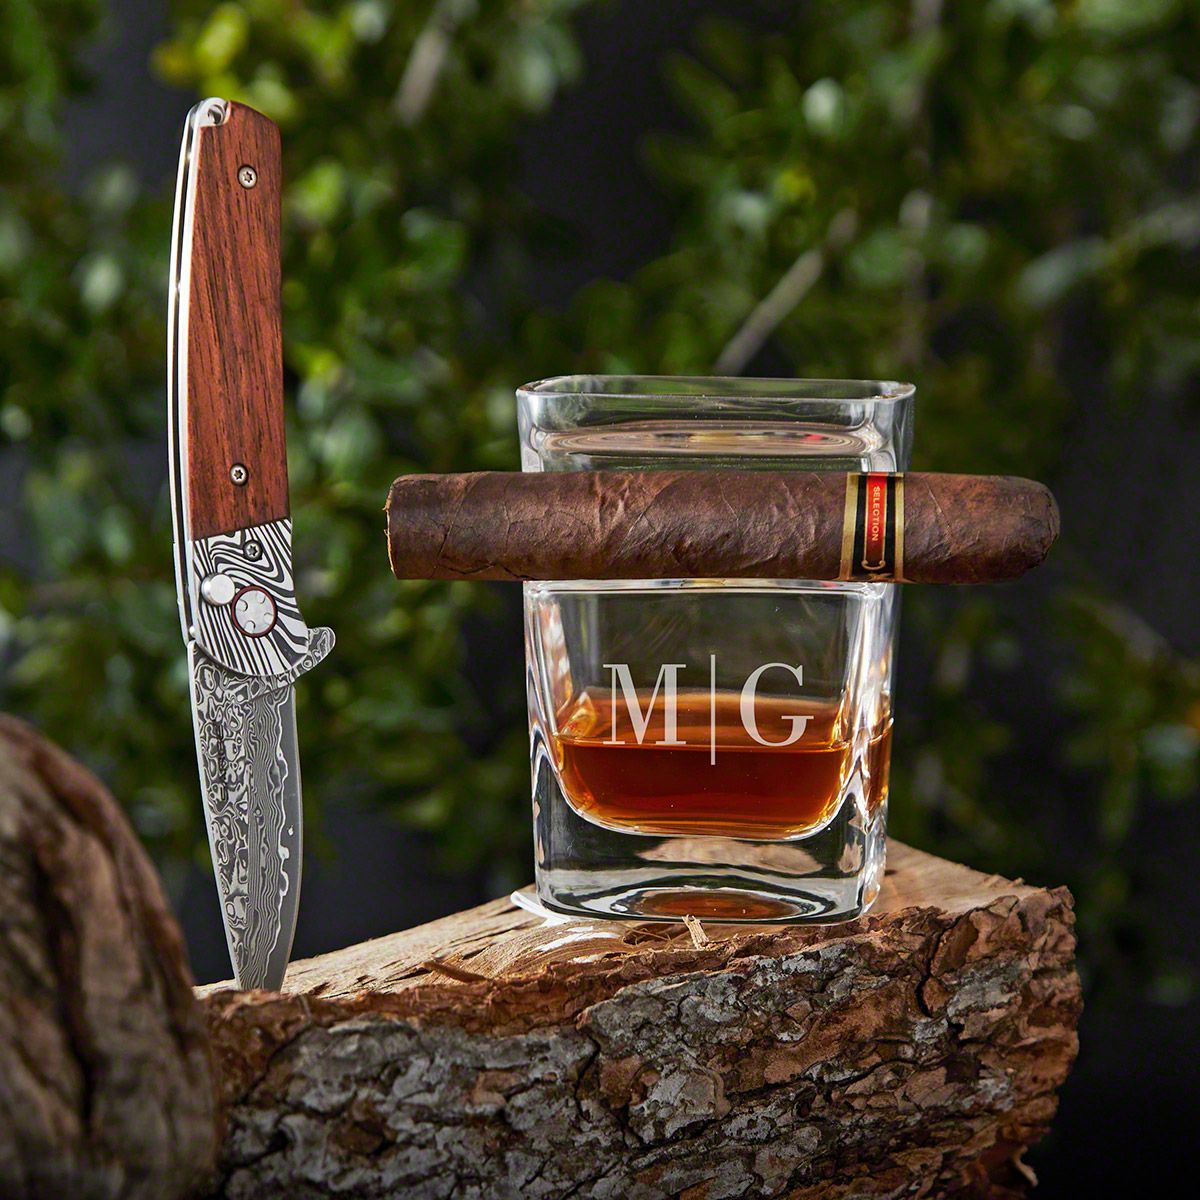 https://images.homewetbar.com/media/catalog/product/p/e/personalized-gift-set-for-men-damascus-knife-and-quinton-cigar-glass_p_9578.jpg?store=default&image-type=image